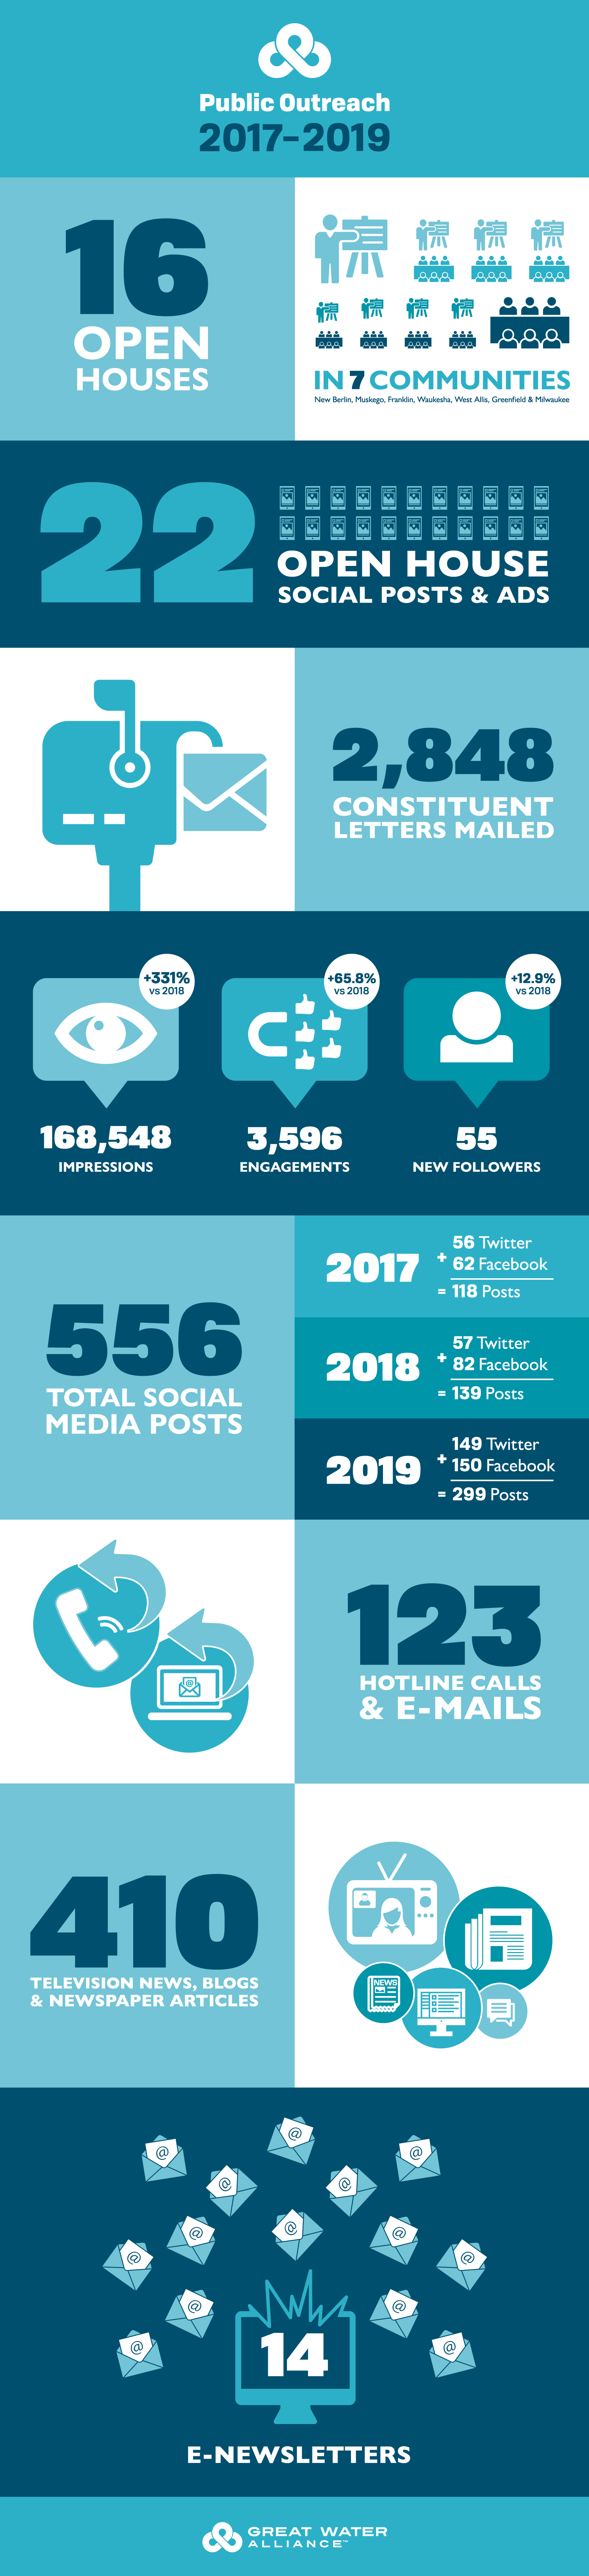 GWA Outreach 2017-2019 infographic